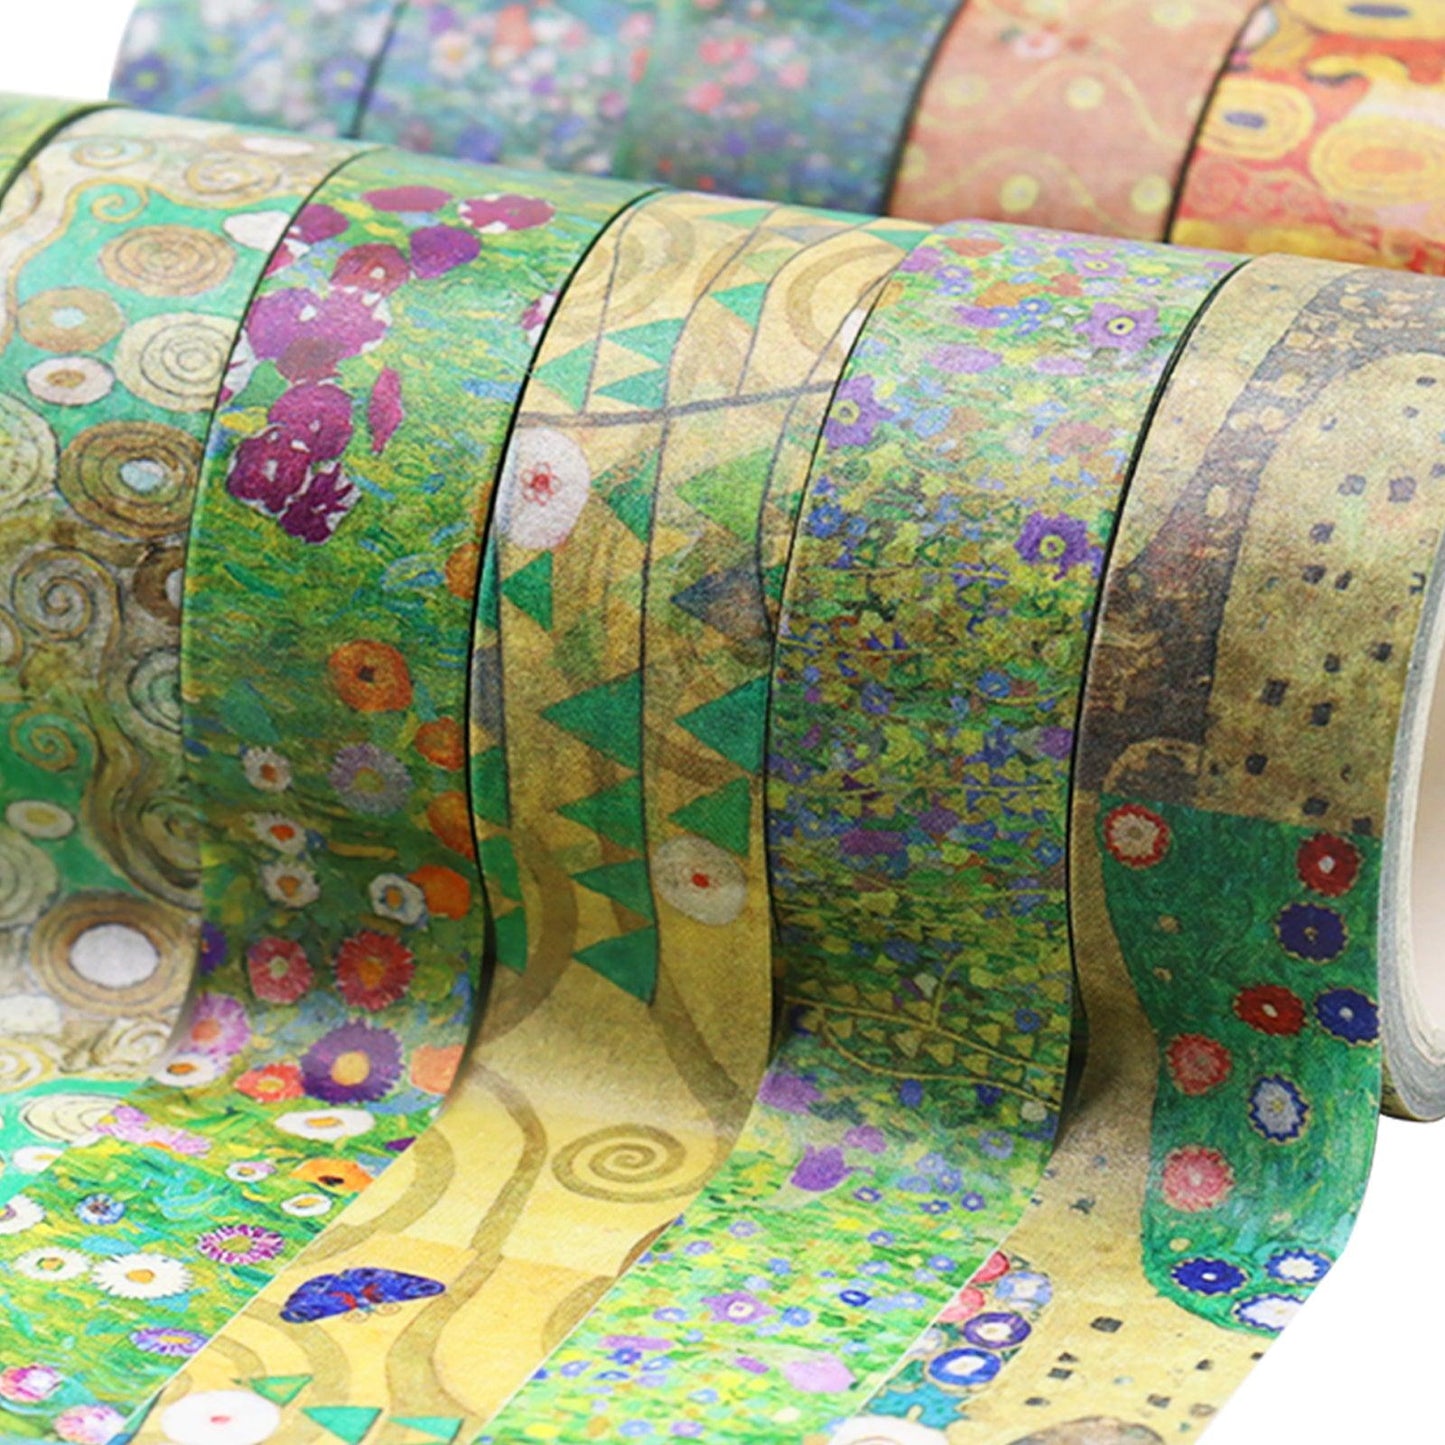 Sea Flowers Washi Tape - Floral Washi Tape more at Sttelland Boutique